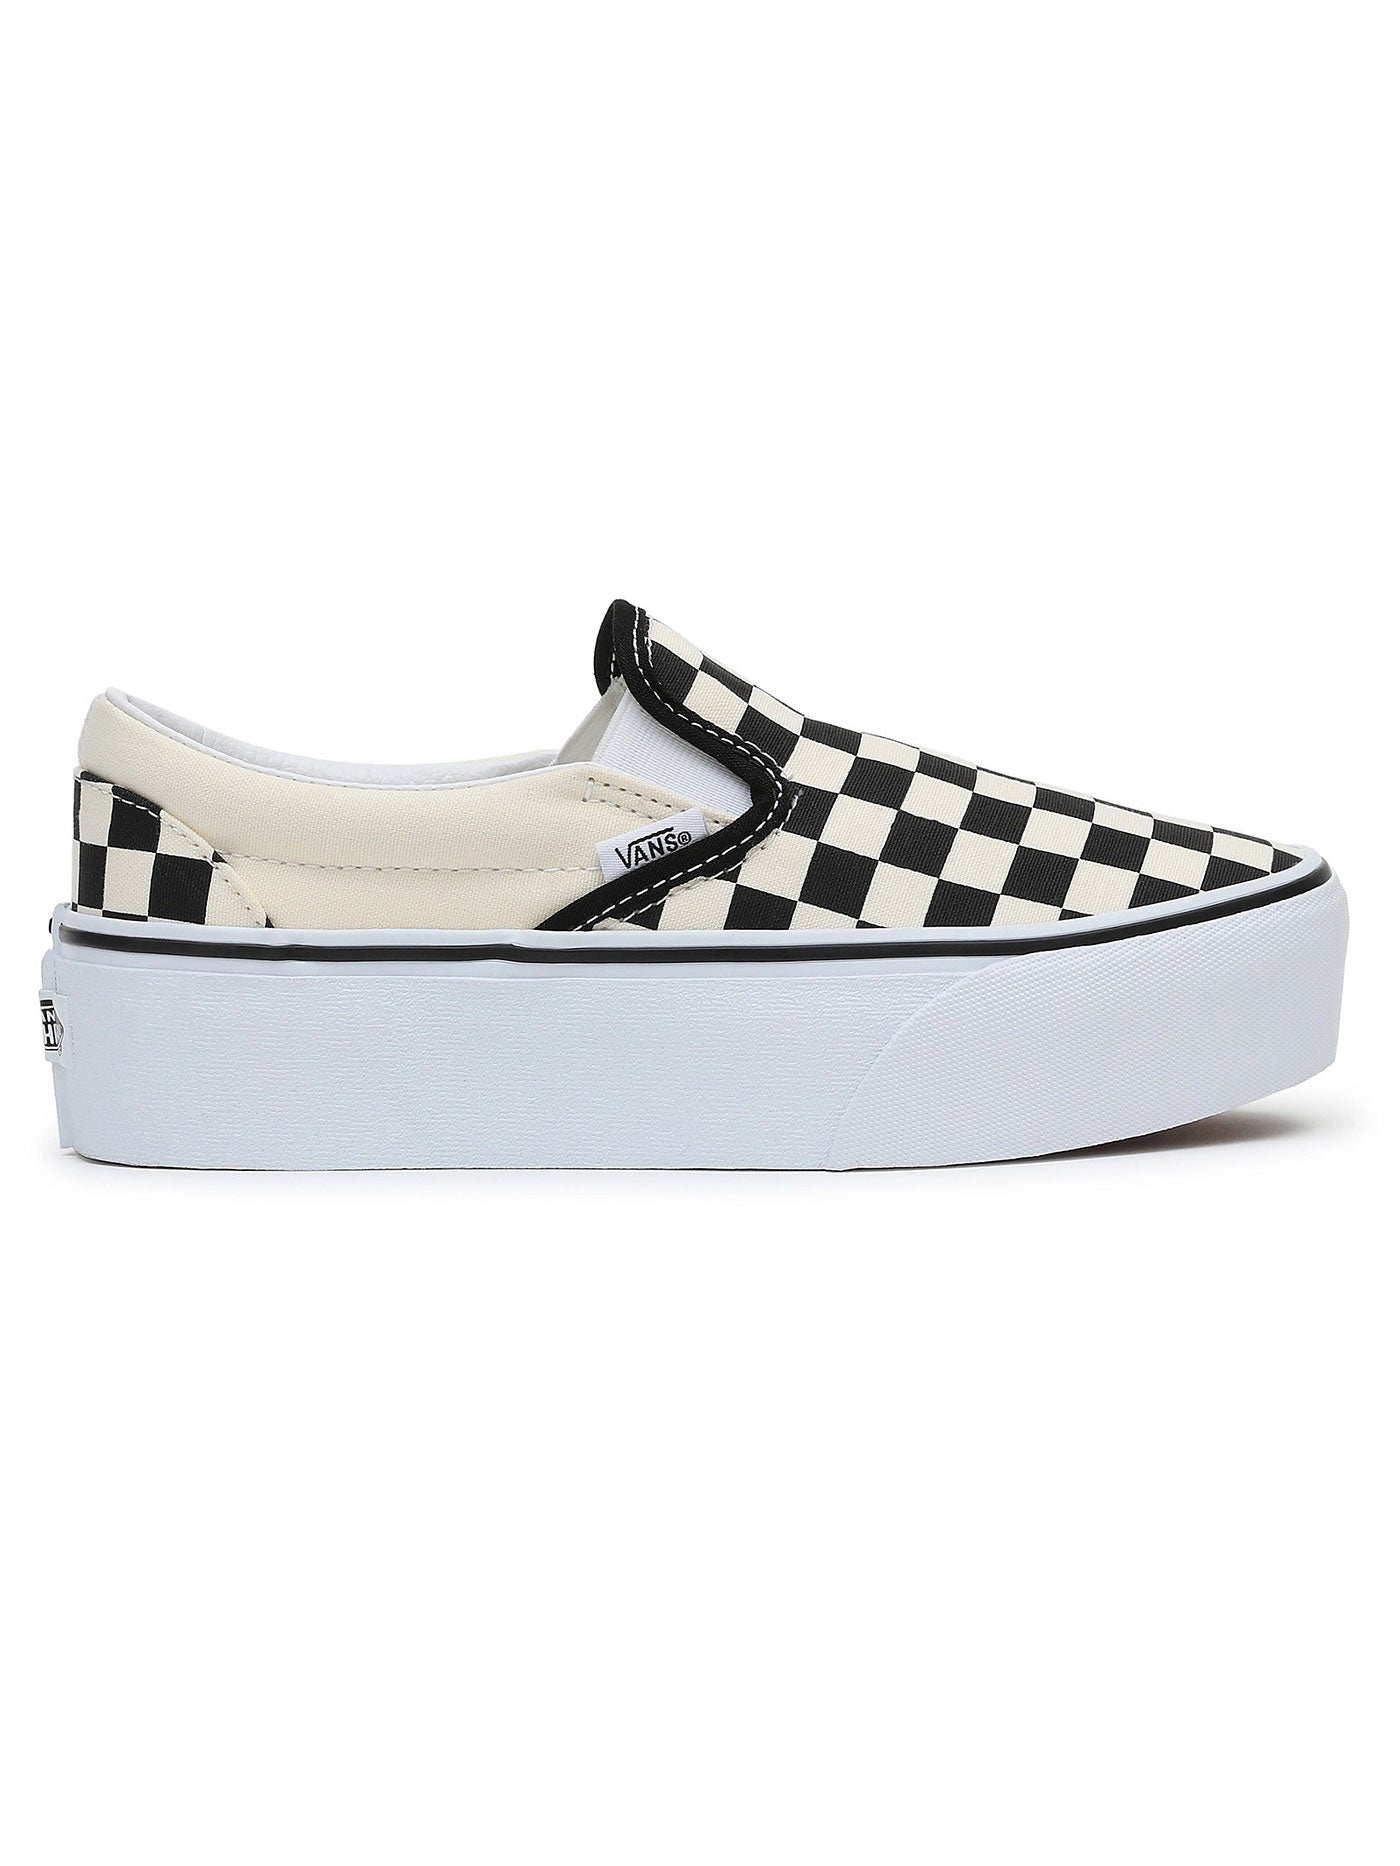 Vans Classic Slip-On Stackform Checkerboard Black/White Shoes